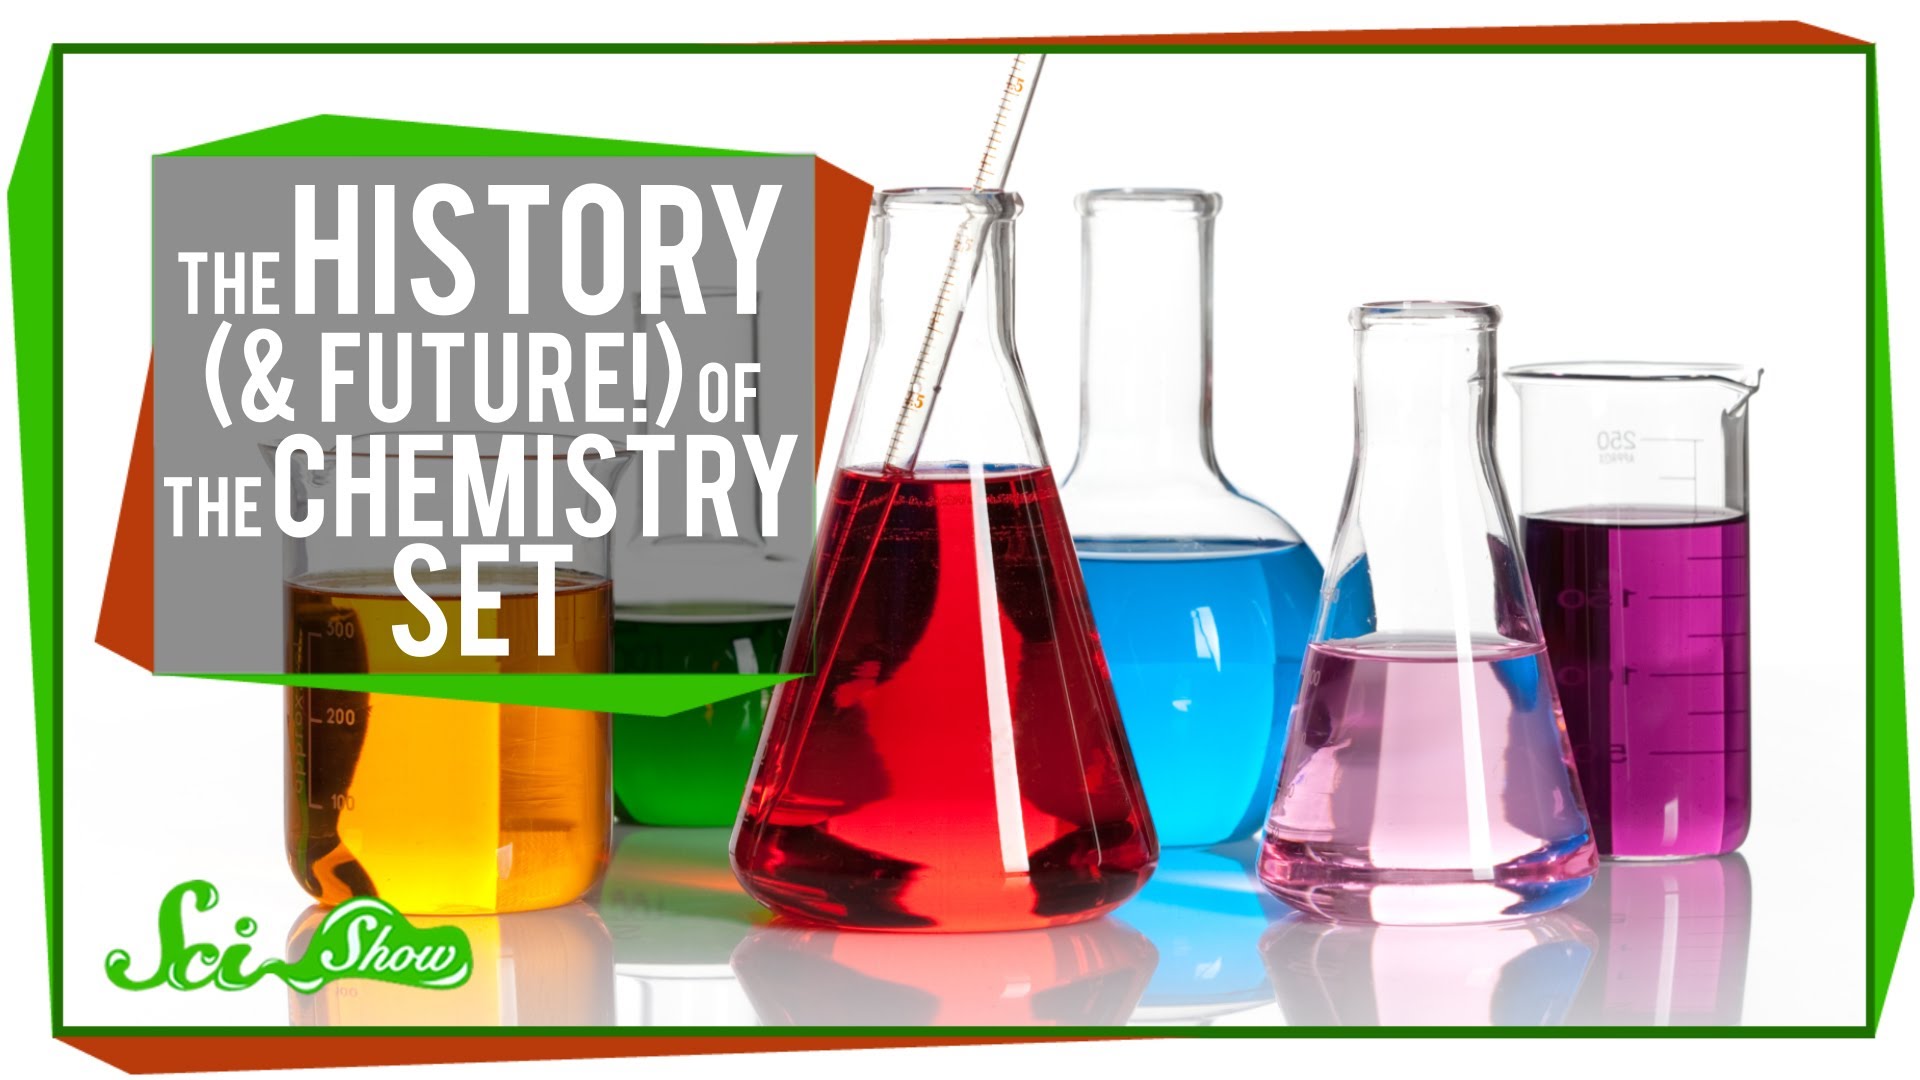 The History (And Future!) of the Chemistry Set - YouTube